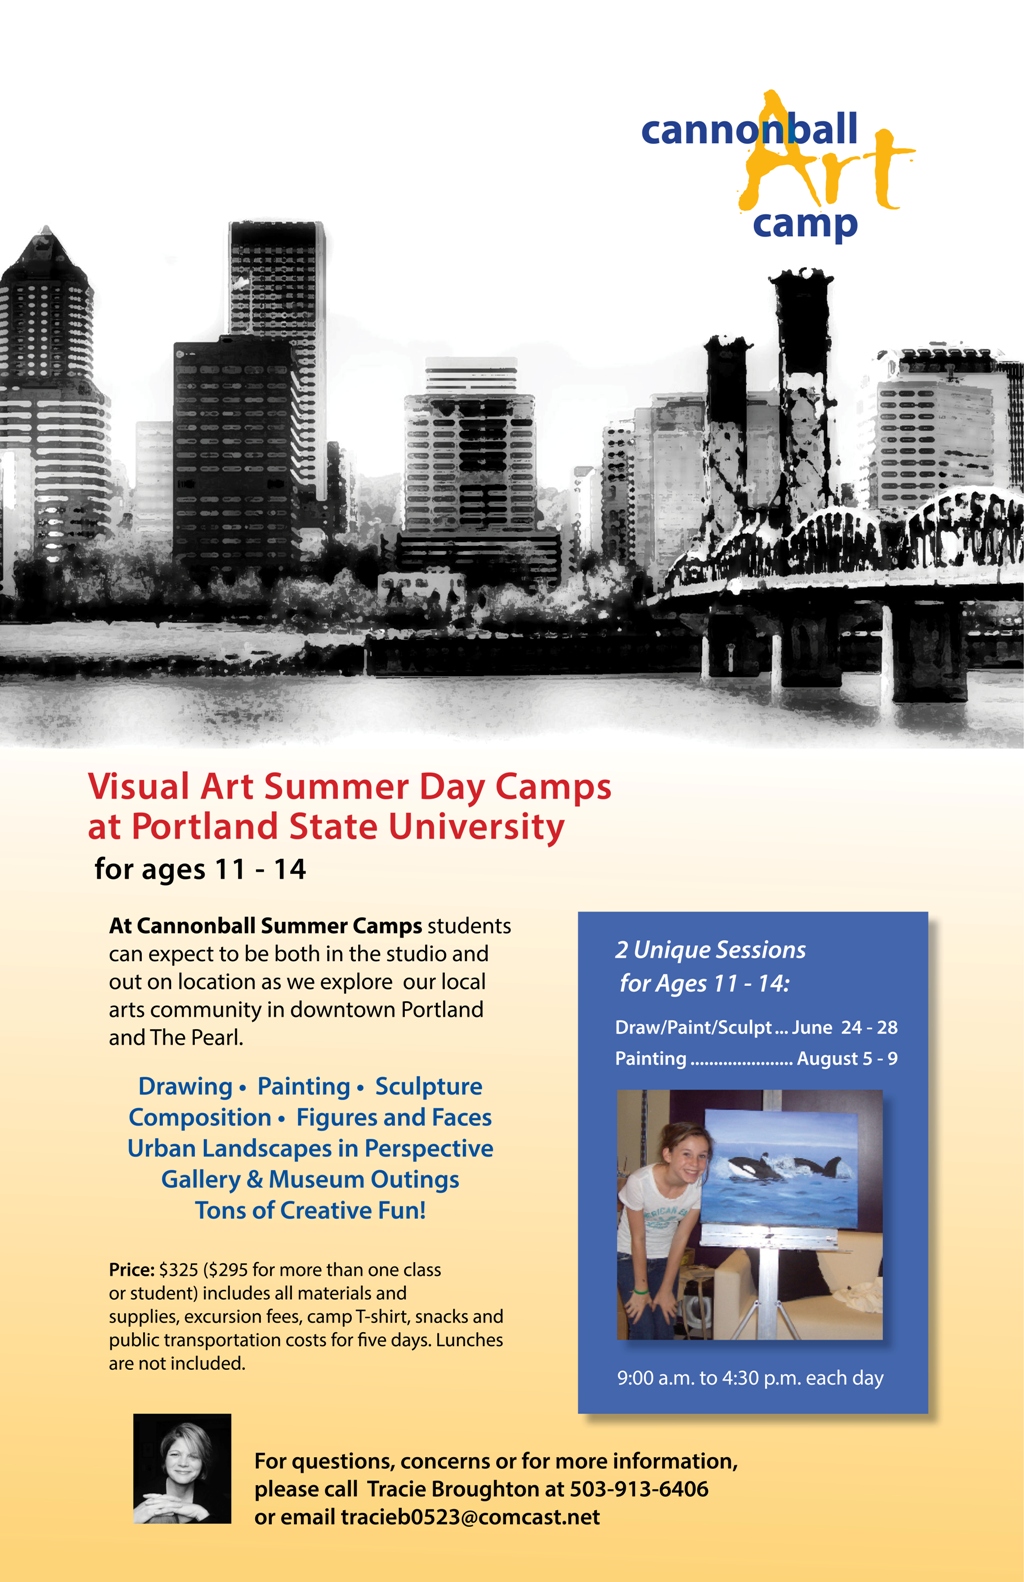 Cannonball Art Camp at Portland State University